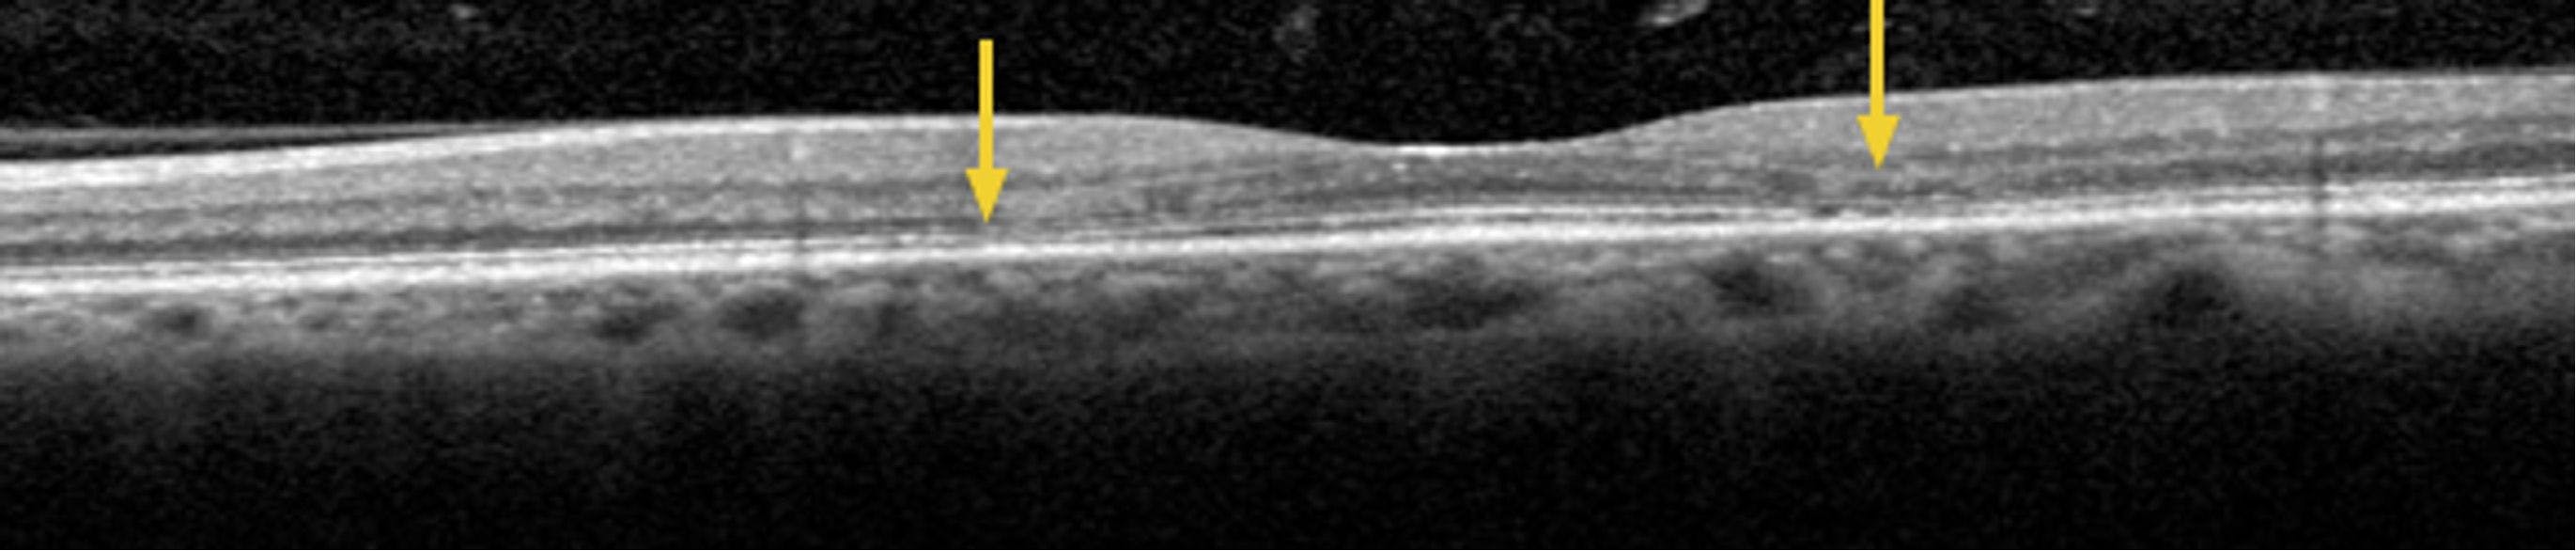 Figure 6. SD-OCT imaging of the right eye with the scan line adjusted to the area just below the fovea. Arrows point to a more obvious area of attenuation of the ELM and IS/OS line temporal to the fovea and a more subtle area of early attenuation nasal to the fovea.